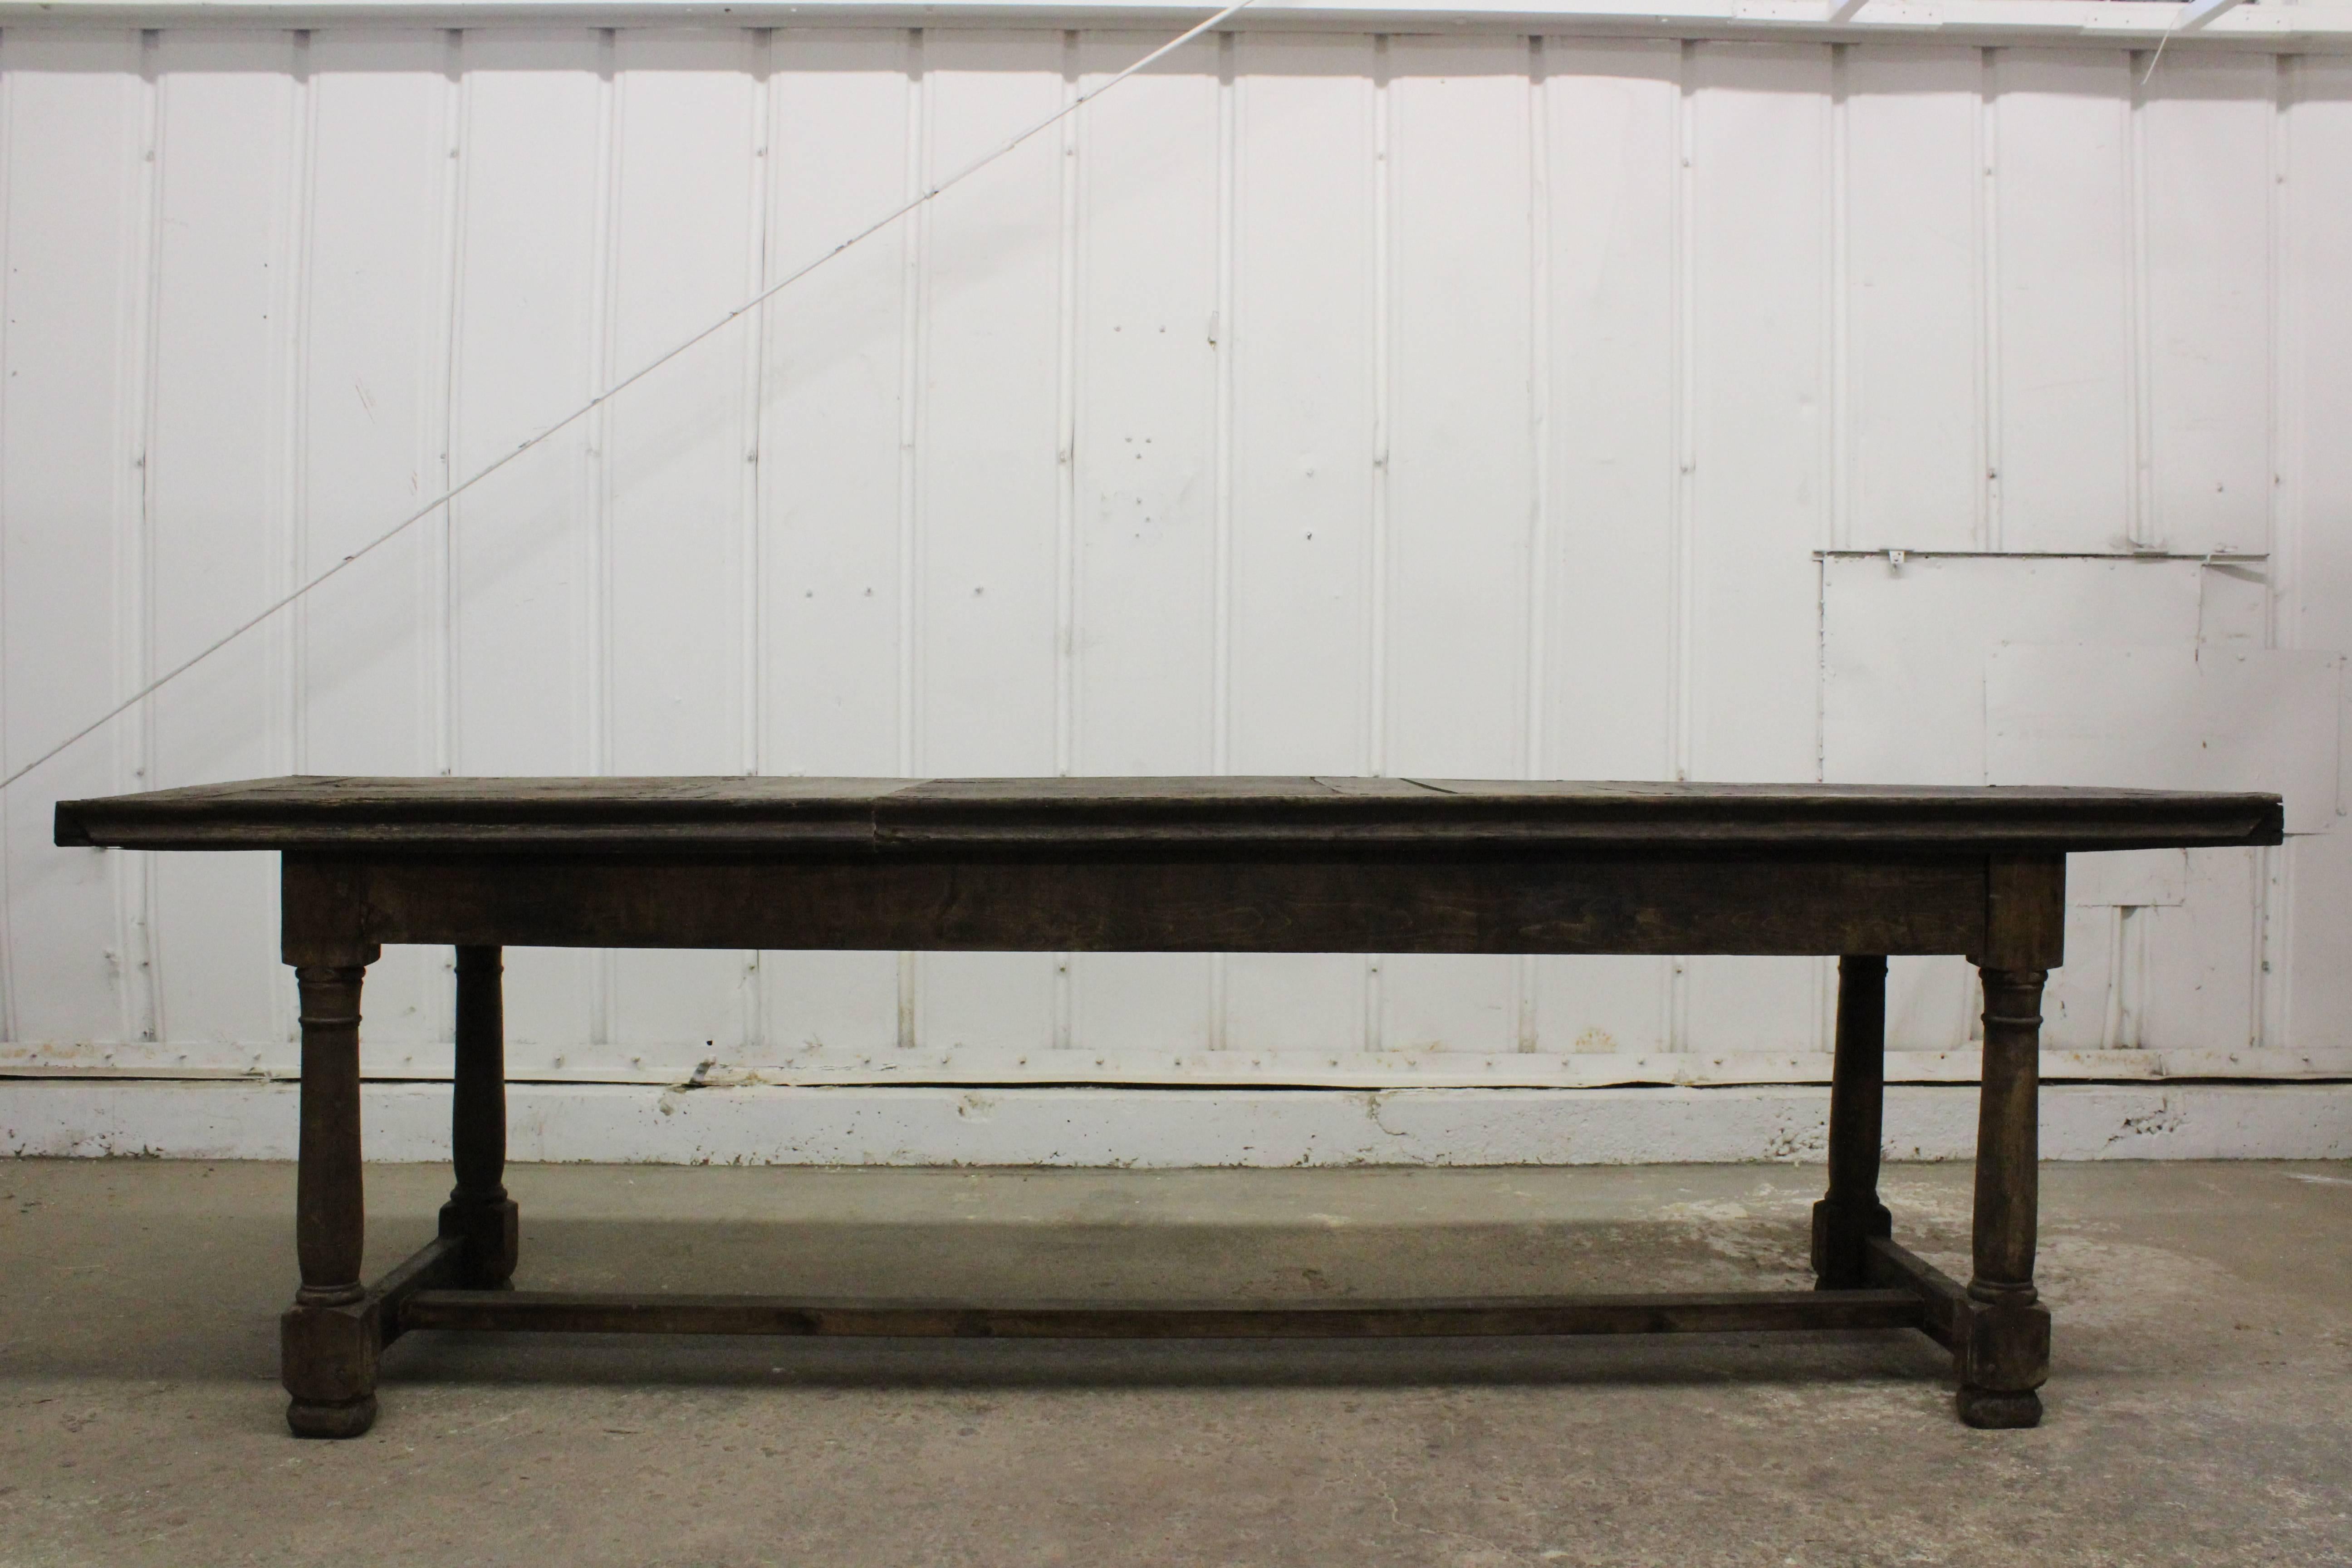 Antique 17th century refectory table made of English oak. This table is in it's original condition with heavy patina and signs of wear.